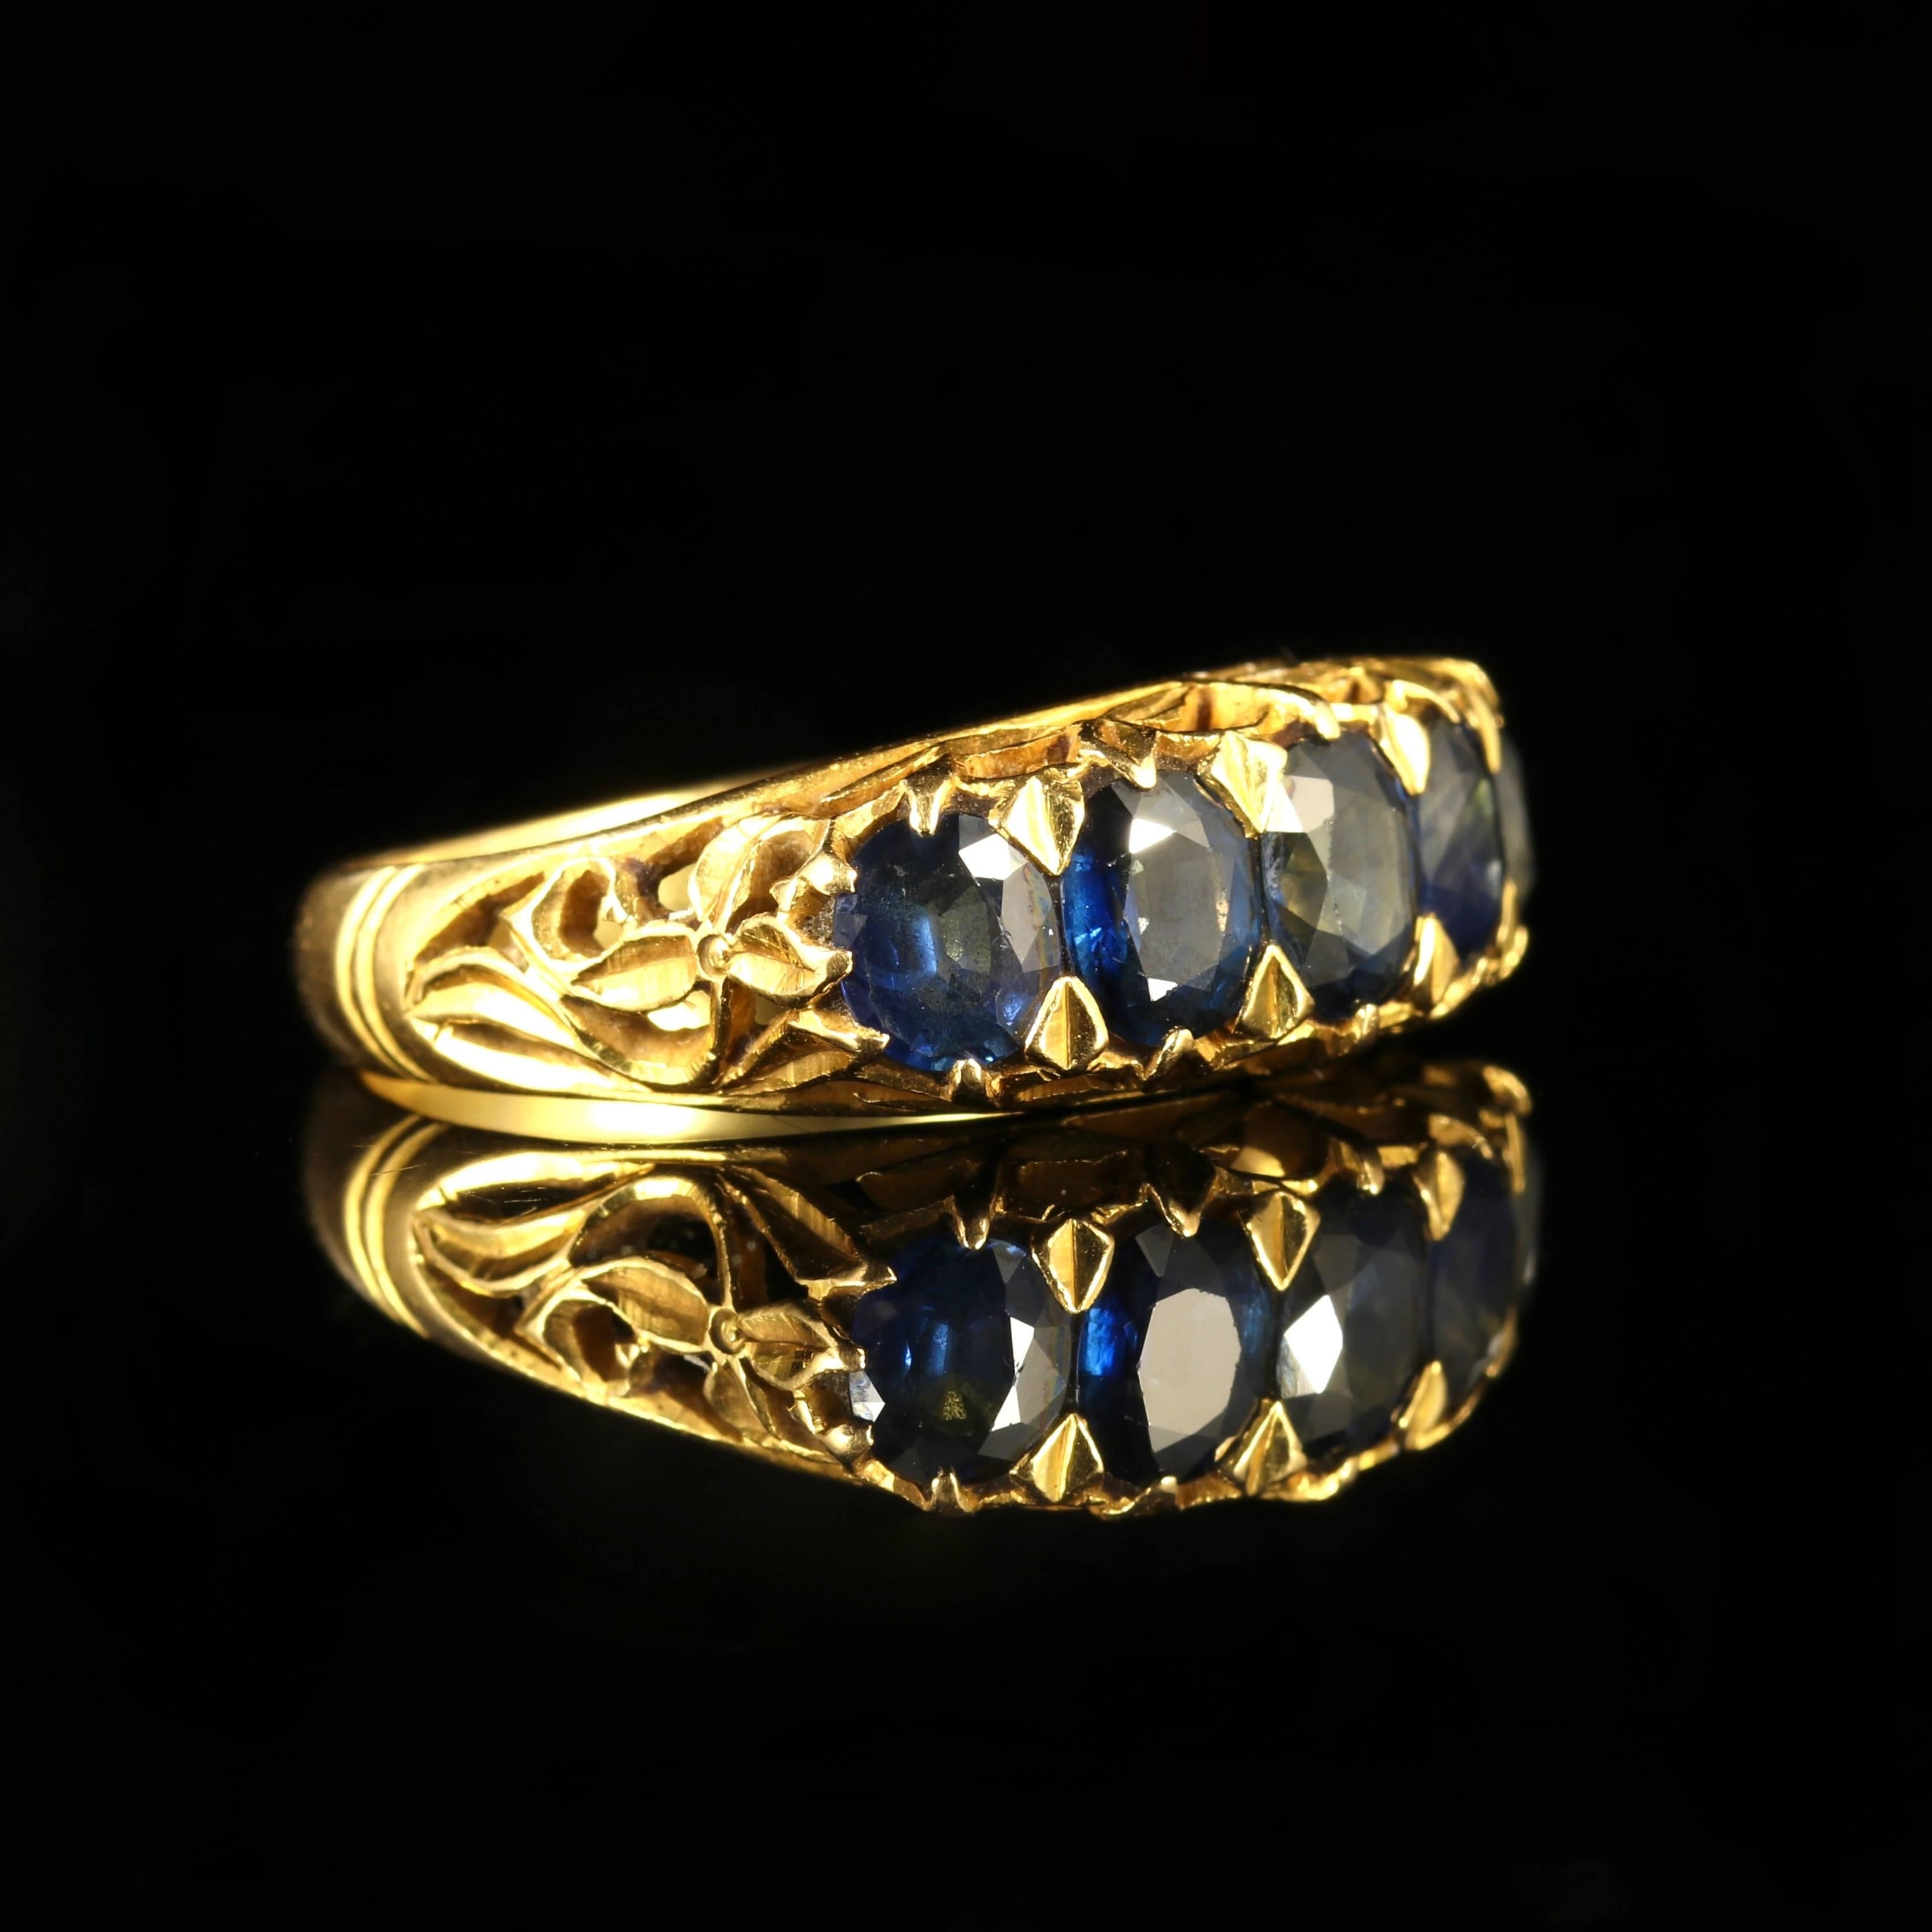 This fabulous Victorian Sapphire ring is Circa 1900.

With Five beautiful rich Sapphires that are set into the lovely gallery.

Set in 18ct Yellow Gold ornate gallery and tested with jewellers acid.

Sapphire is the symbol of feelings of sympathy,